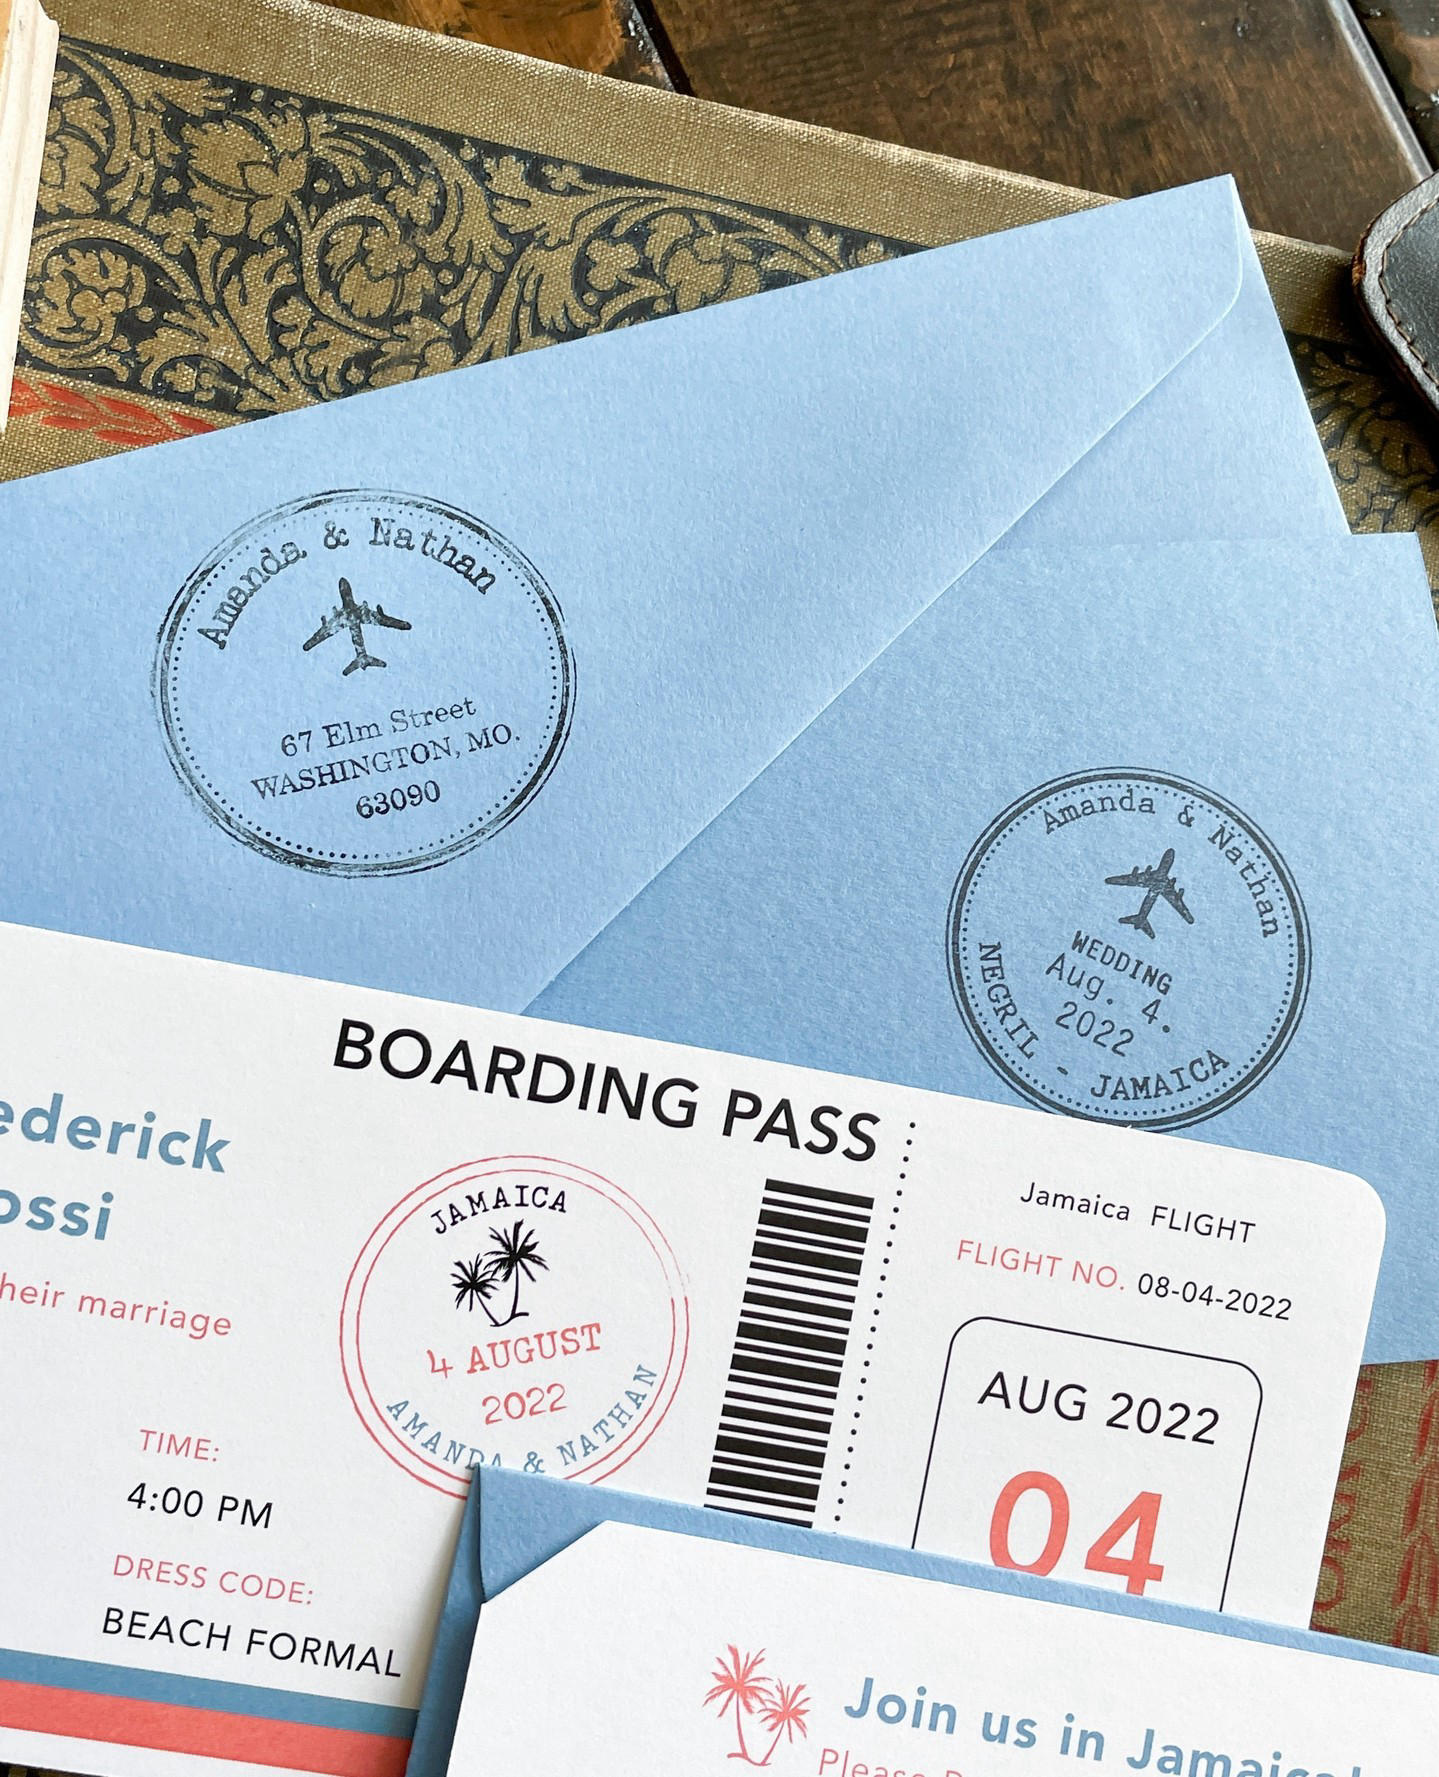 image  1 RubberStamps.com - Look how creative these handmade plane tickets are